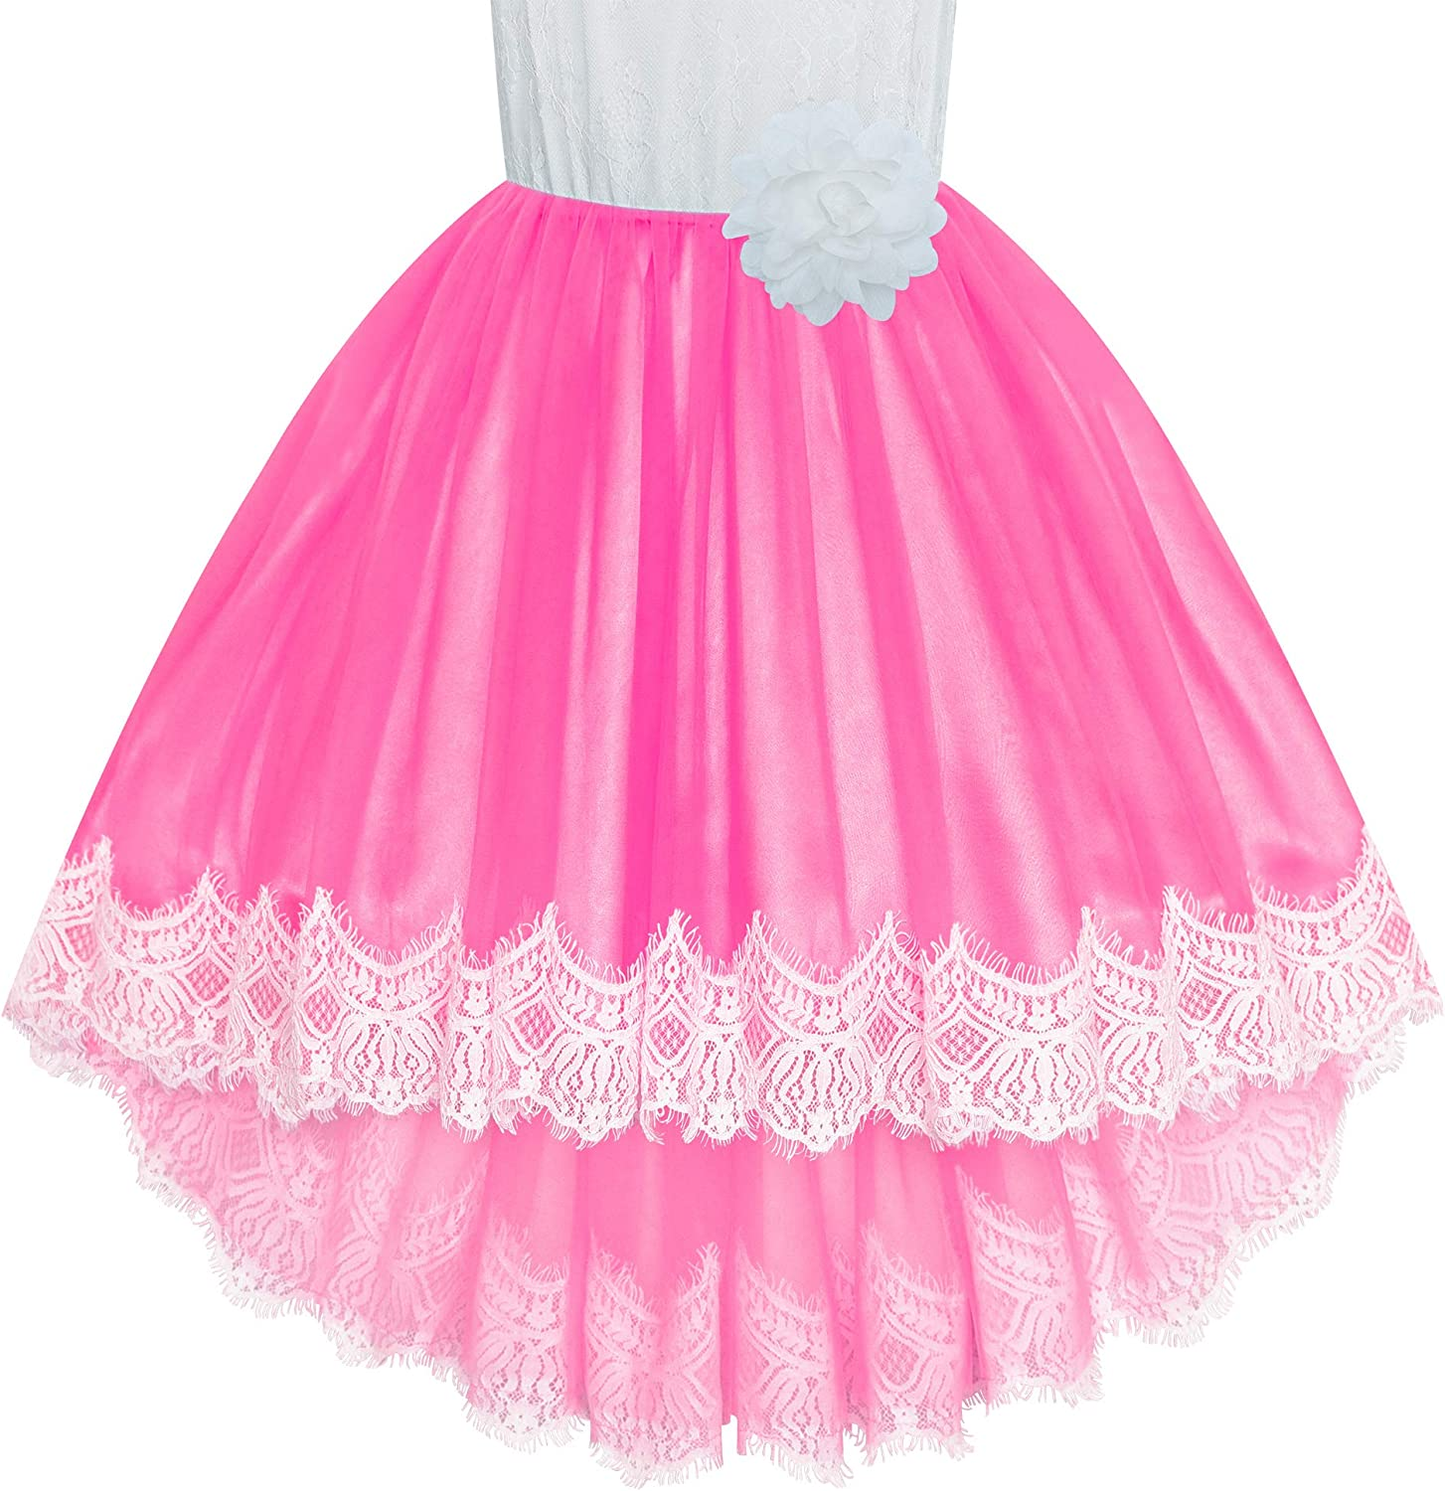 Lace Hi-Low Skirt Flower Girl Dress - Perfect for Weddings, Pageants, and Special Occasions!